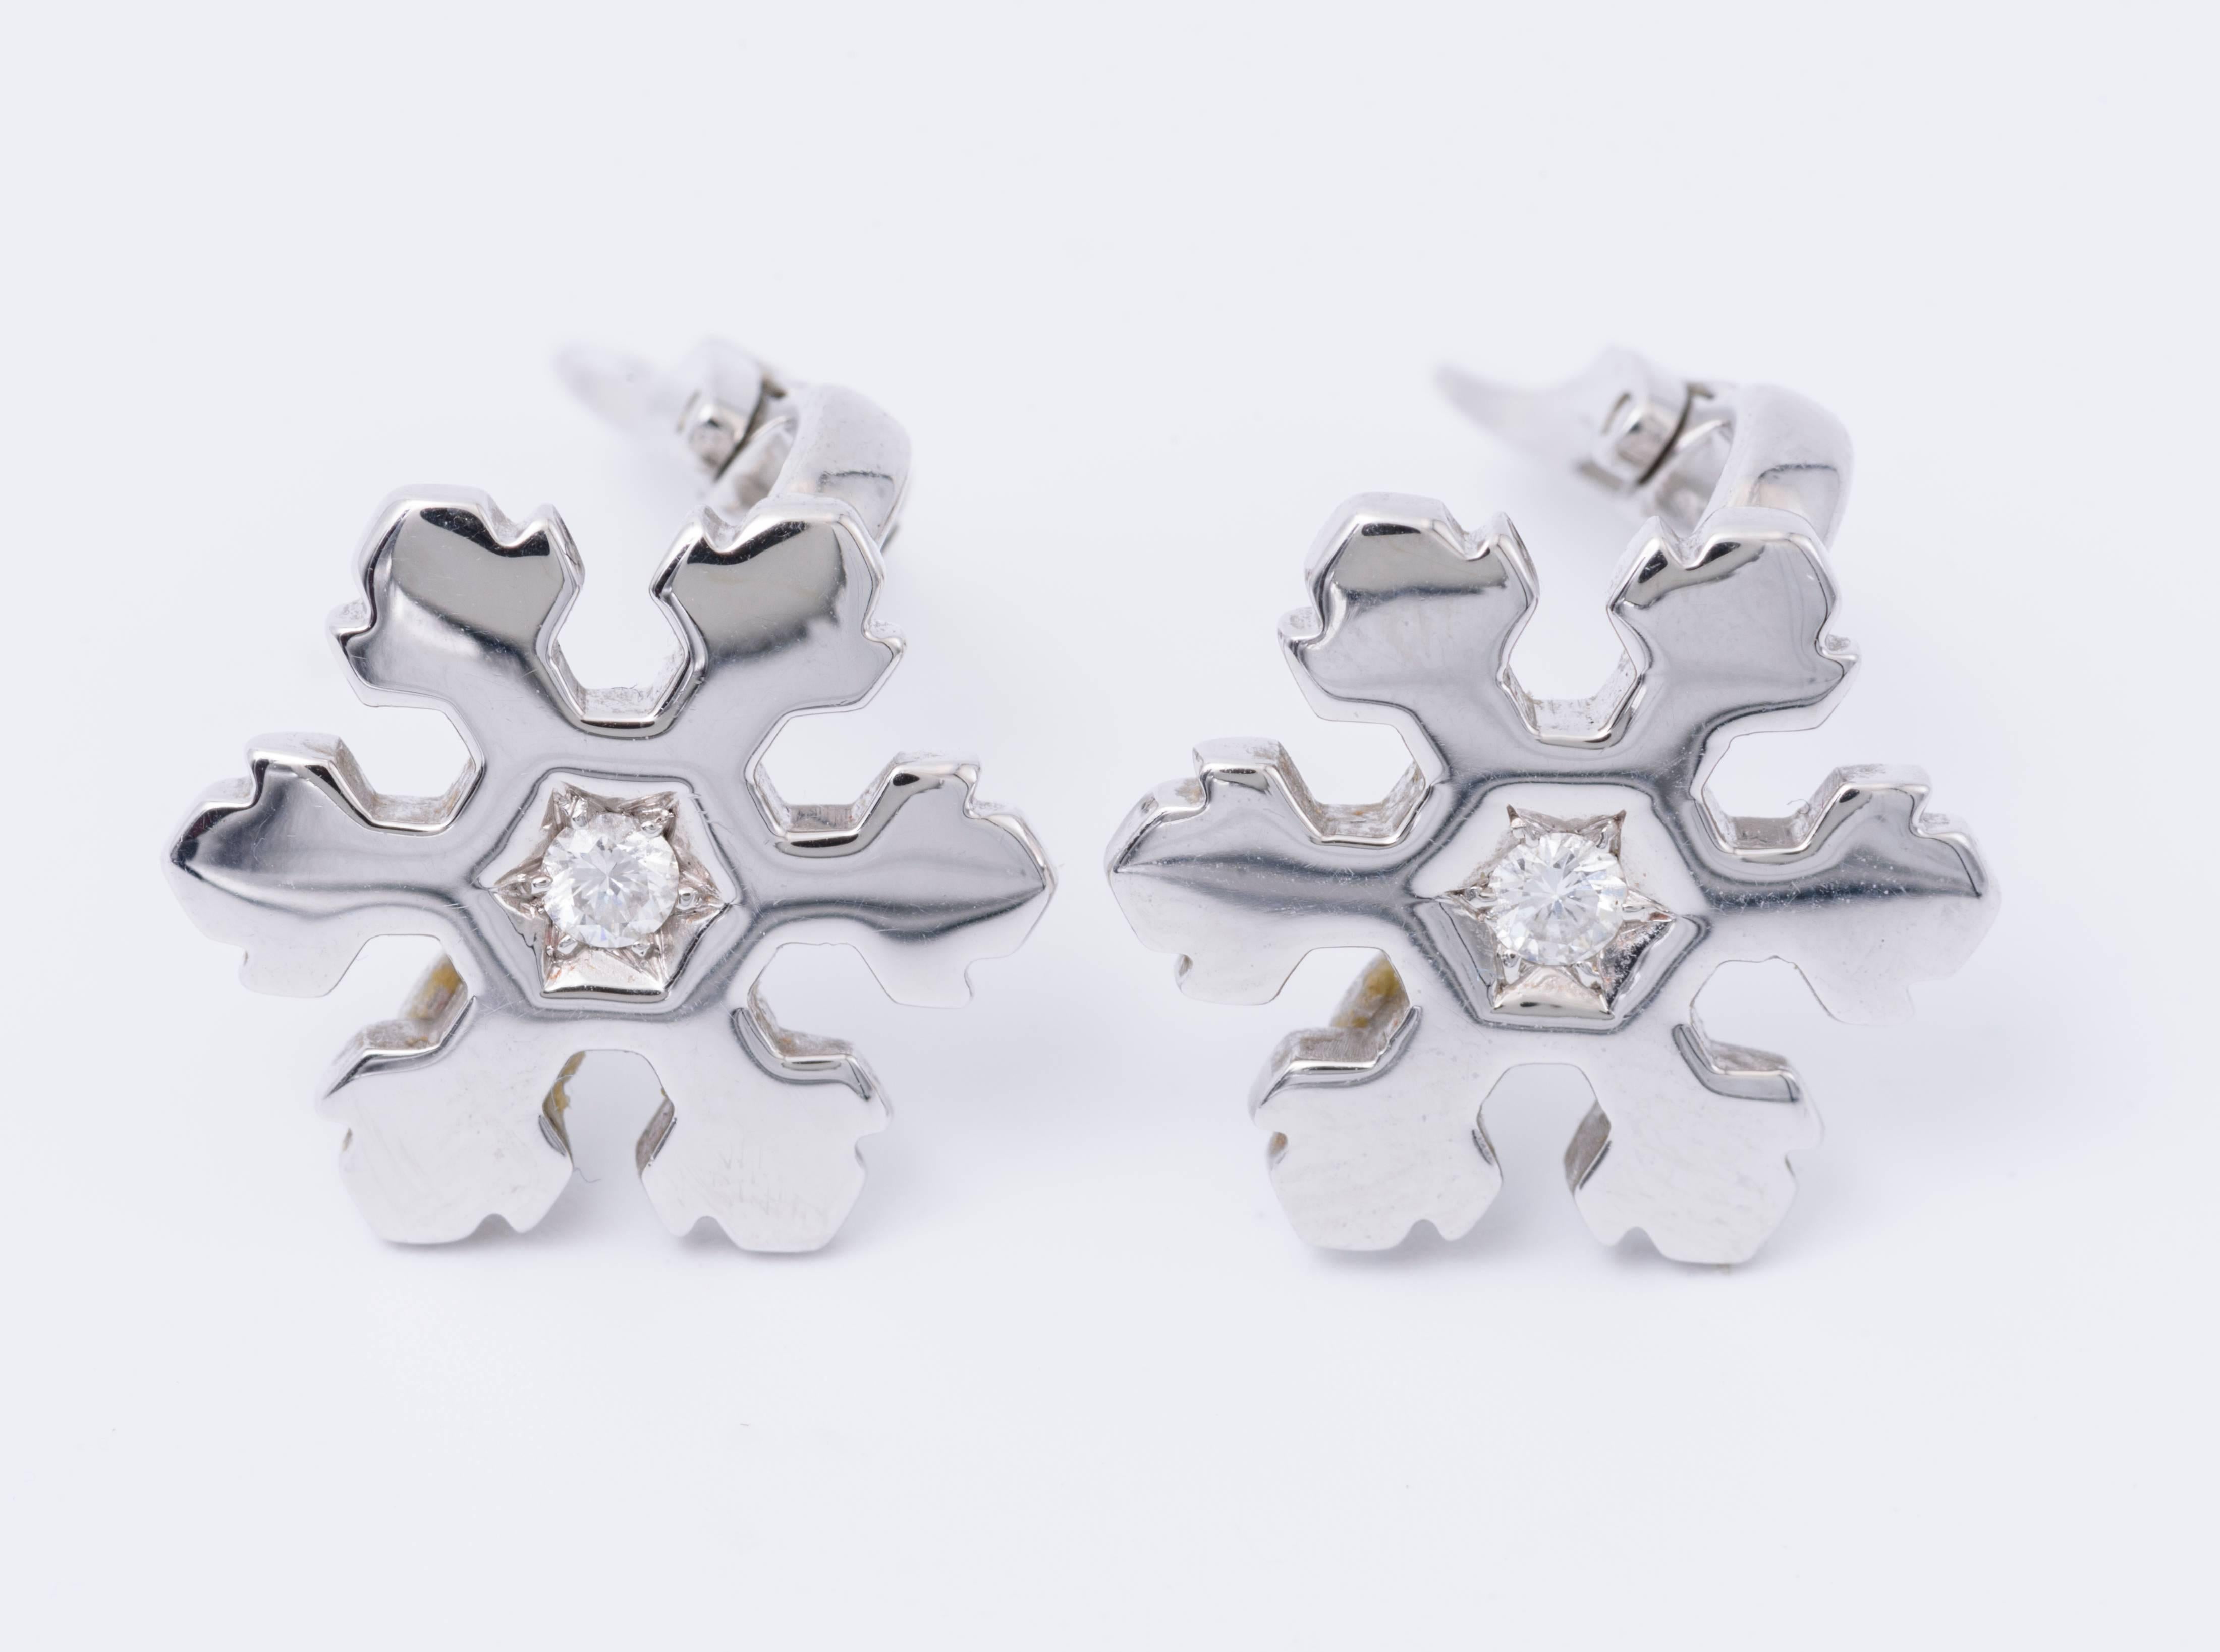 These snowflake-shaped earrings are set in pure 18kt White Gold and features a round White Diamond. The Polygon setting around the stone allows for a unique style.